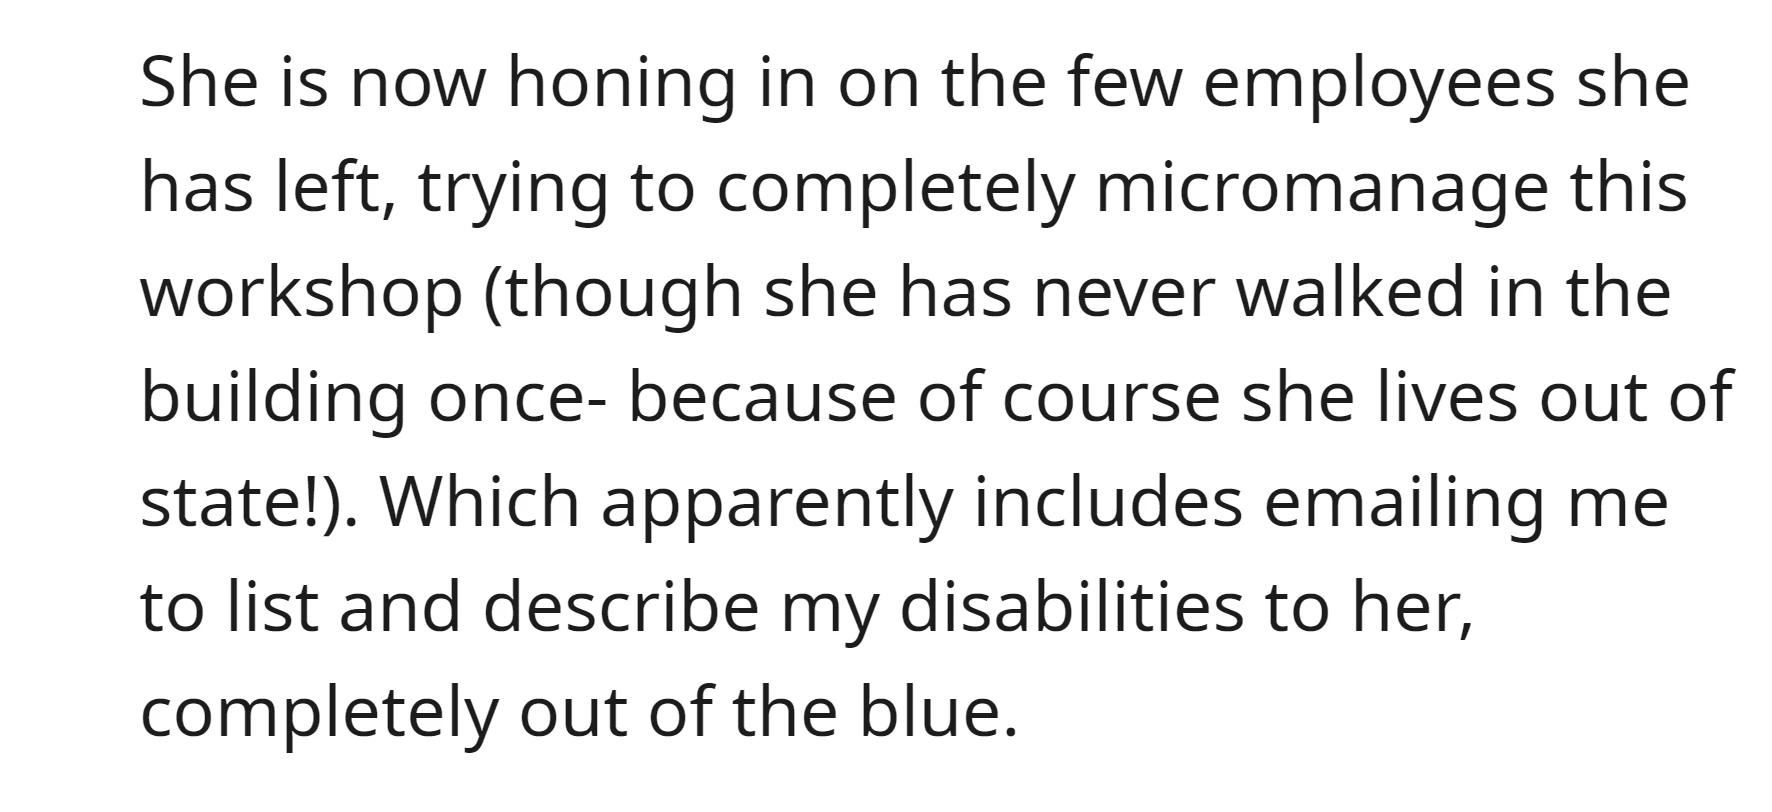 Stand-in manager unexpectedly asked OP to list and describe their disabilities via email